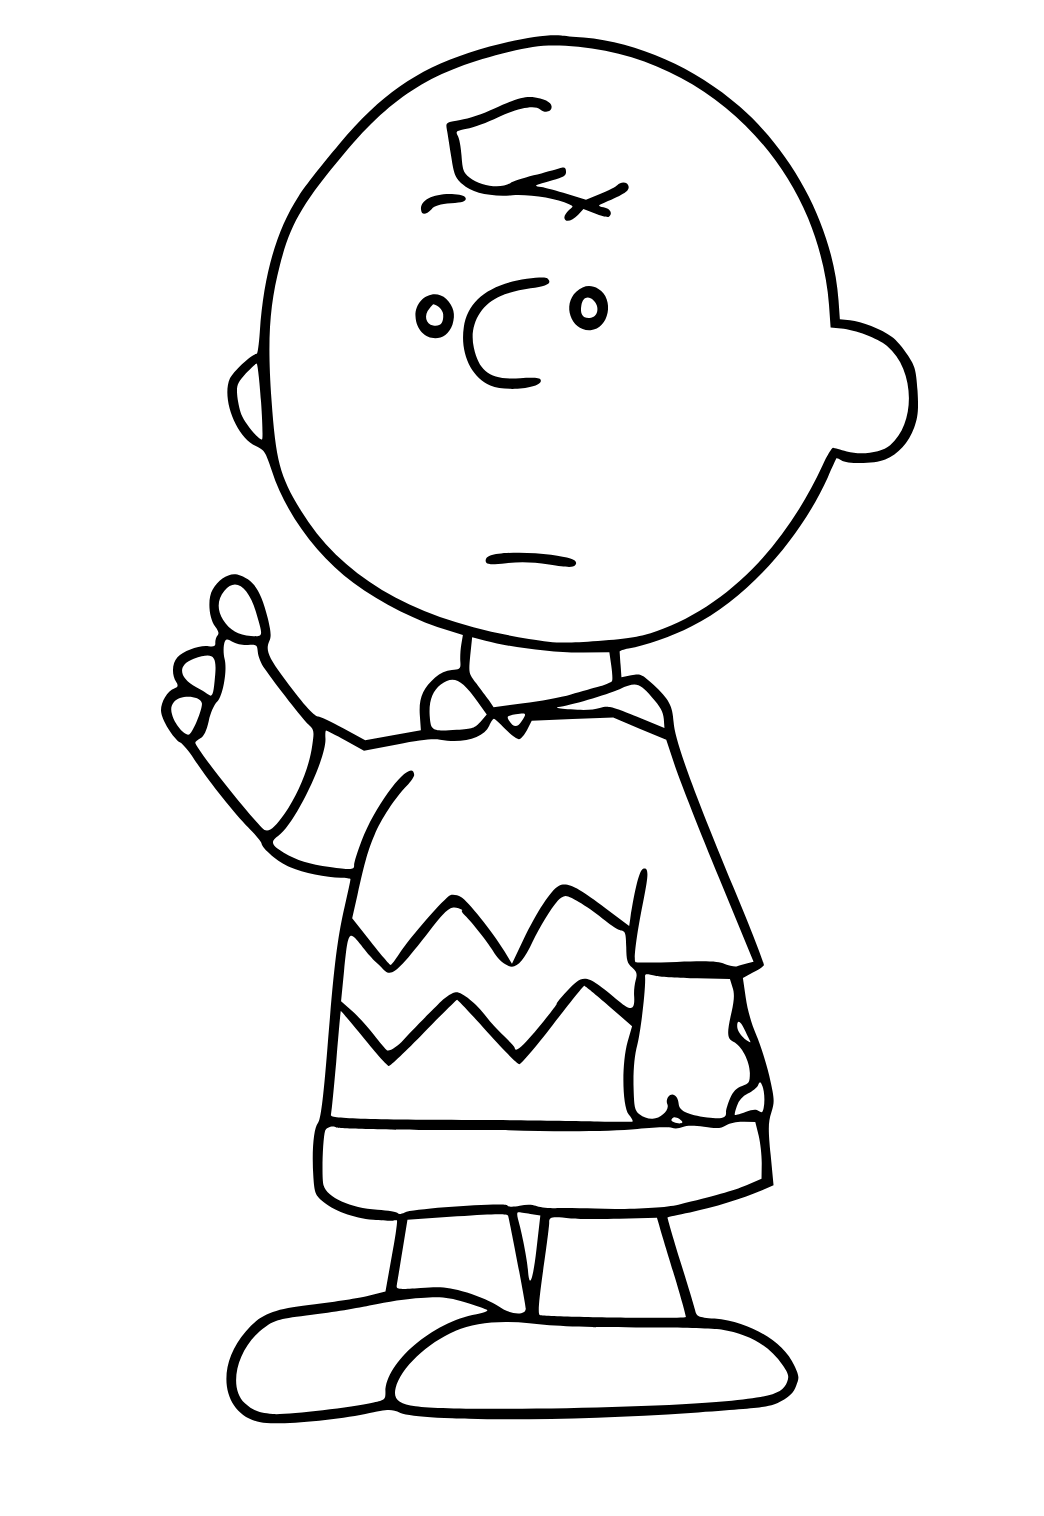 Free printable charlie brown astonishment coloring page for adults and kids